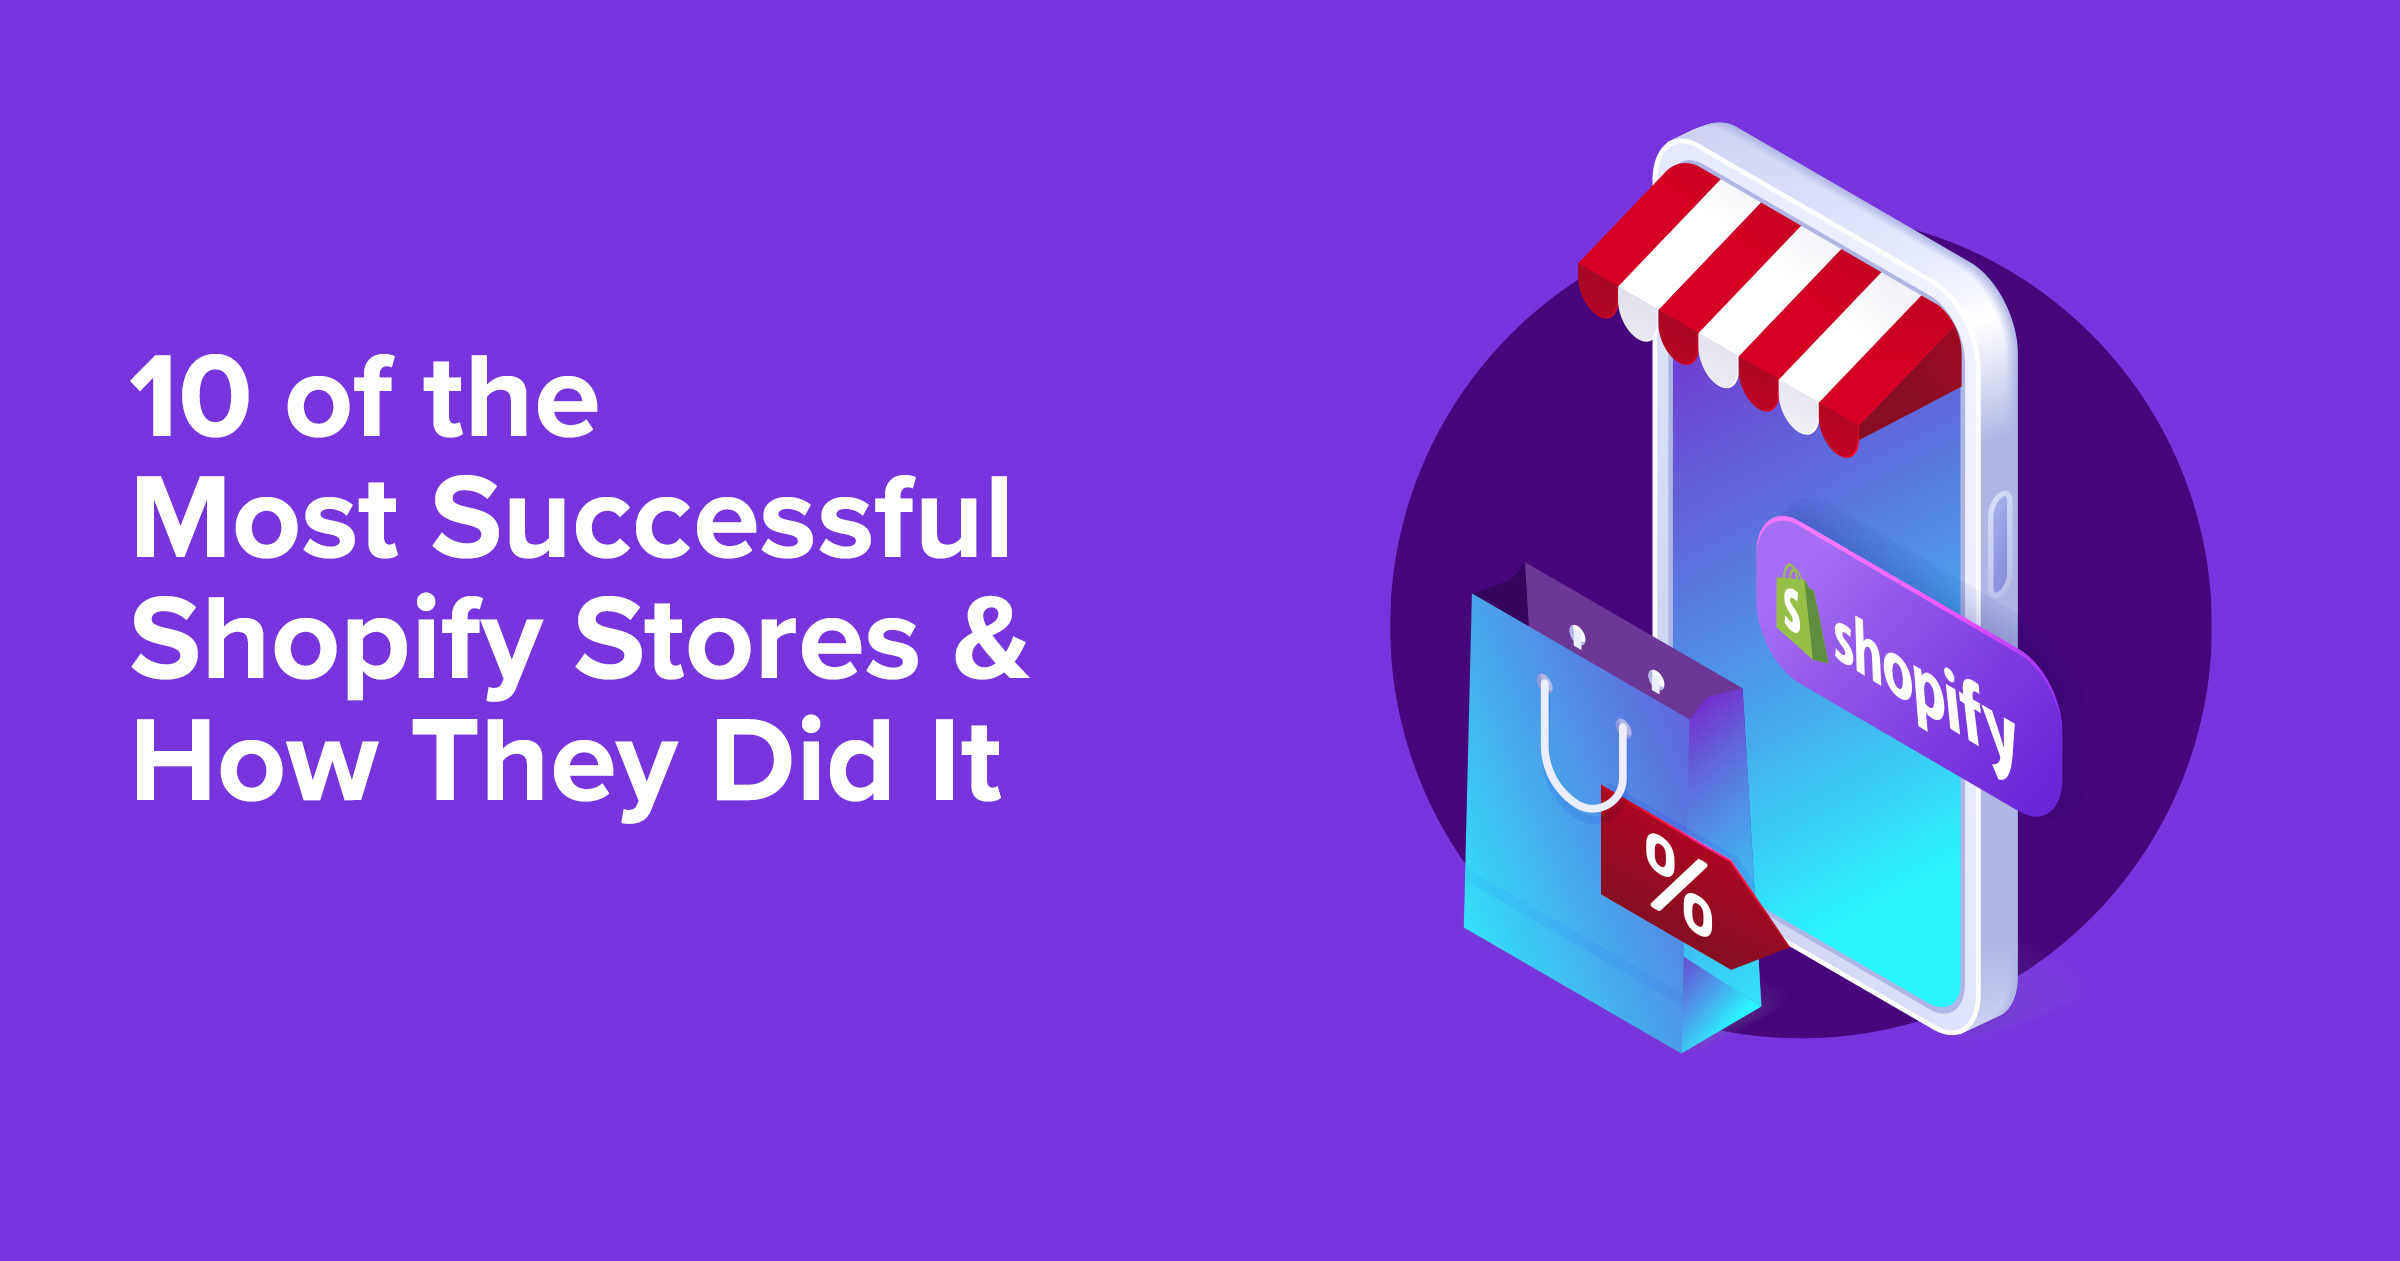 Top 10 Most Successful Shopify Stores & Tactics To Steal - Yieldify